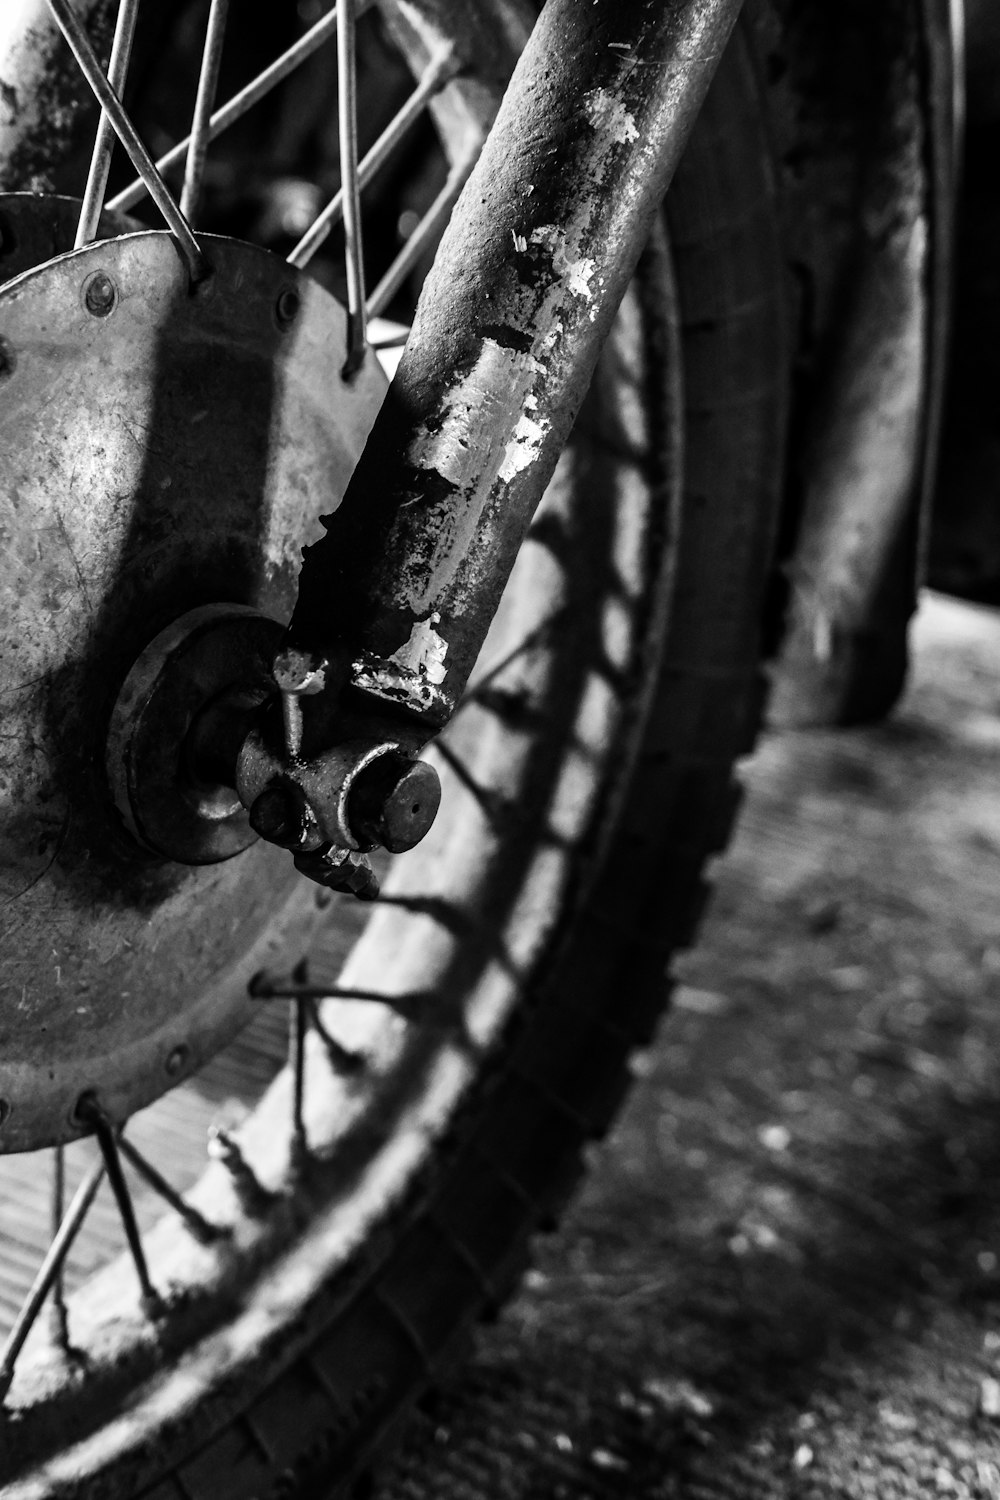 grayscale photo of motorcycle fork